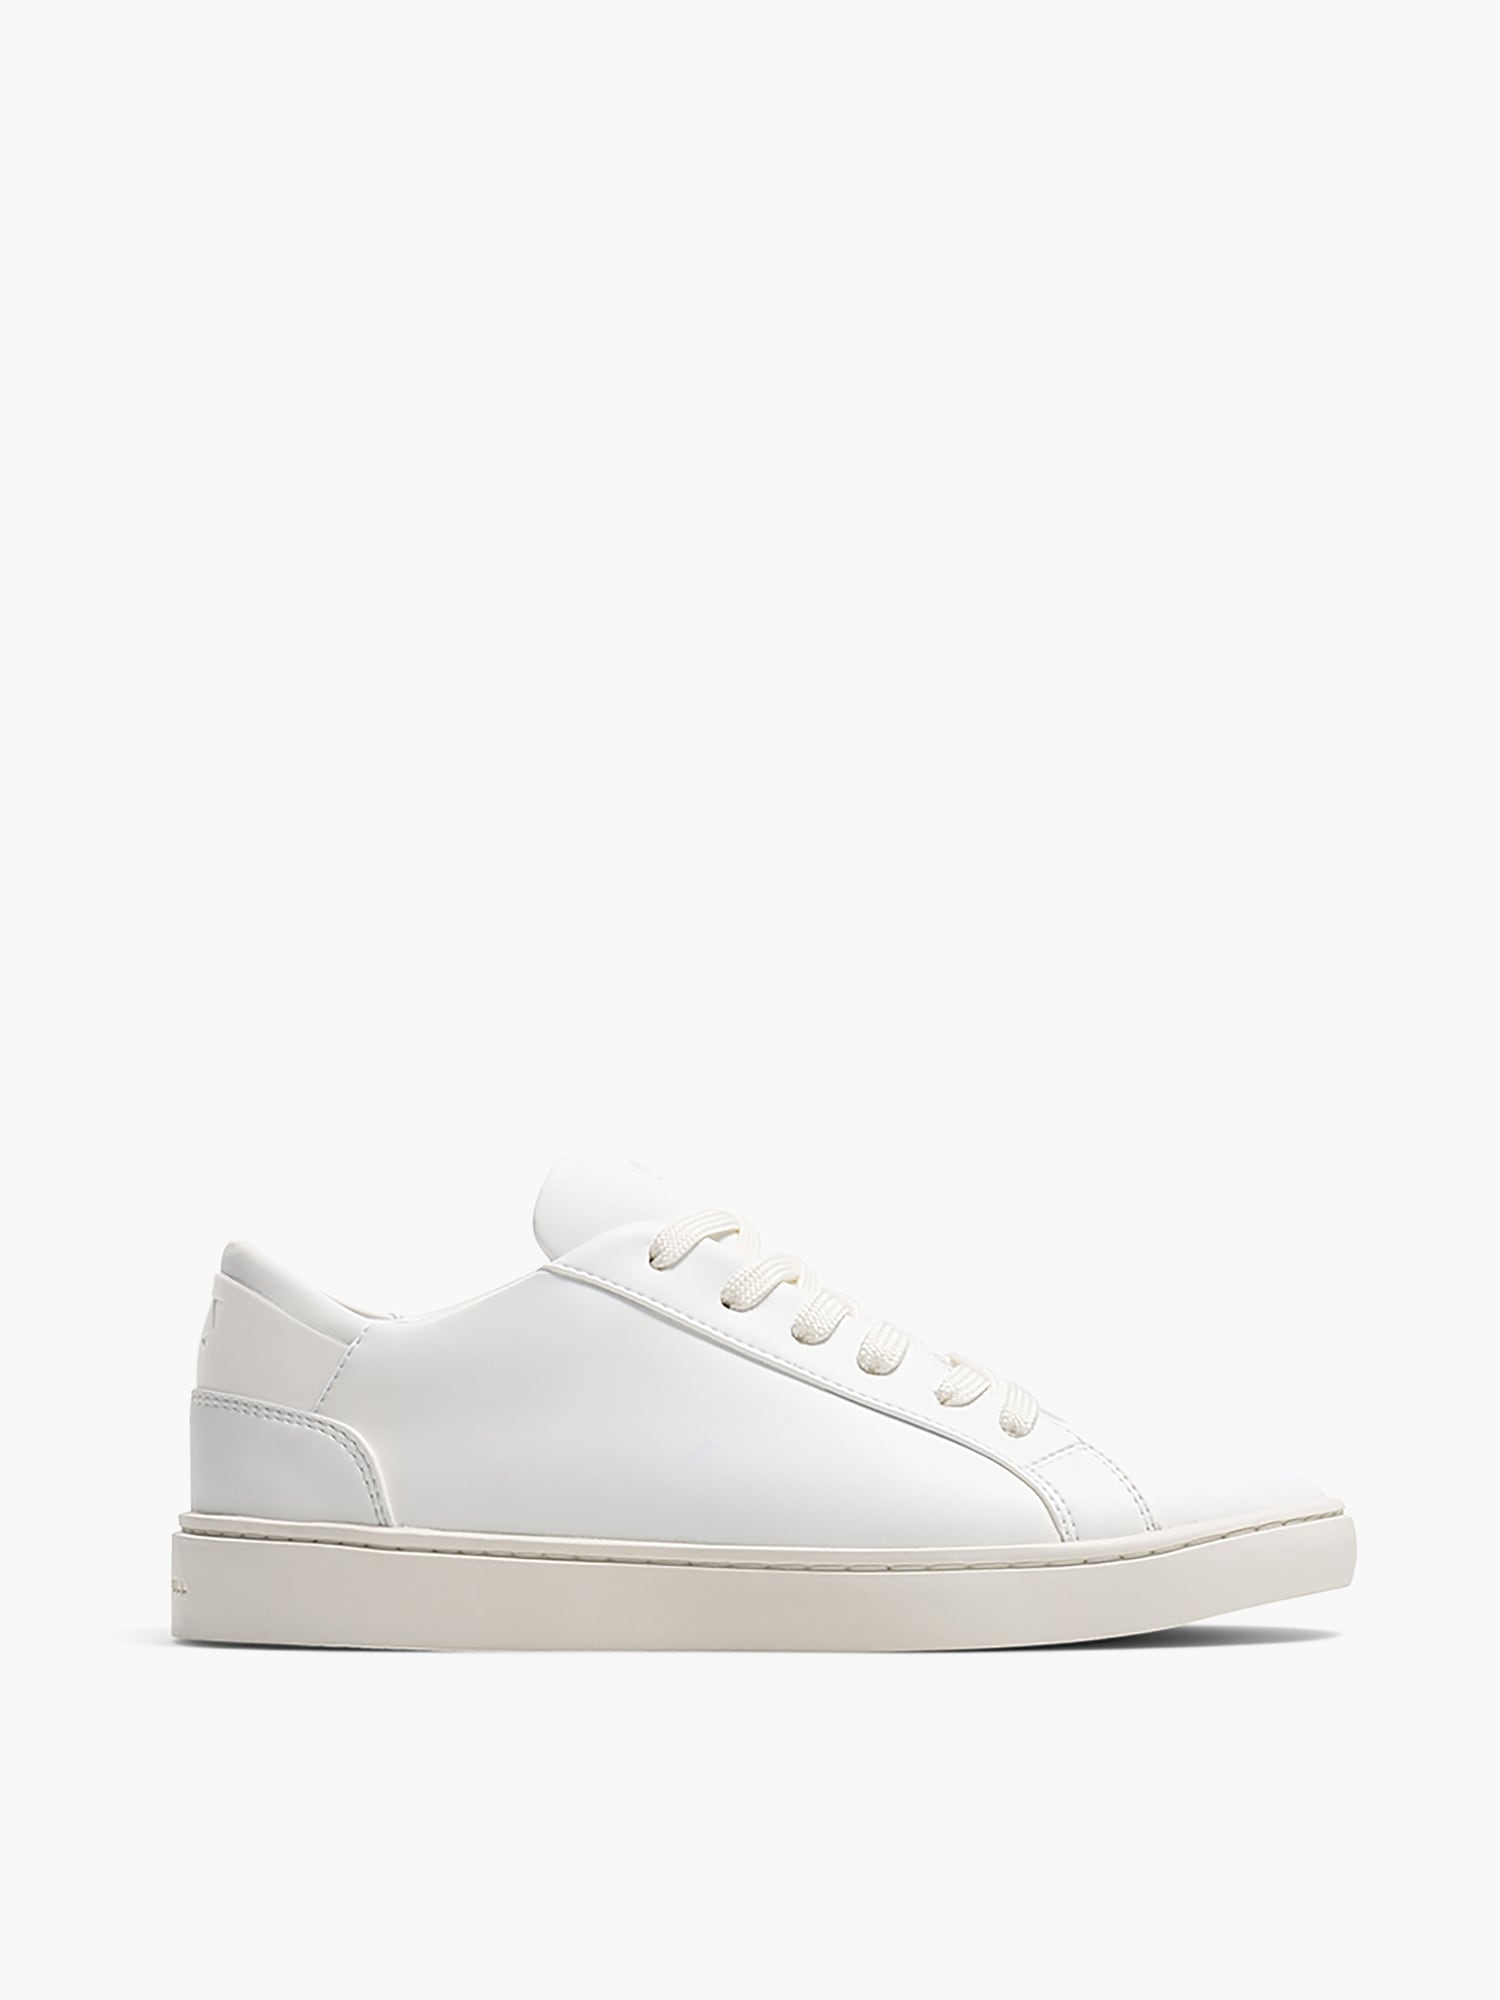 Gap Thousand Fell Womens Lace Up Sneaker white. 1